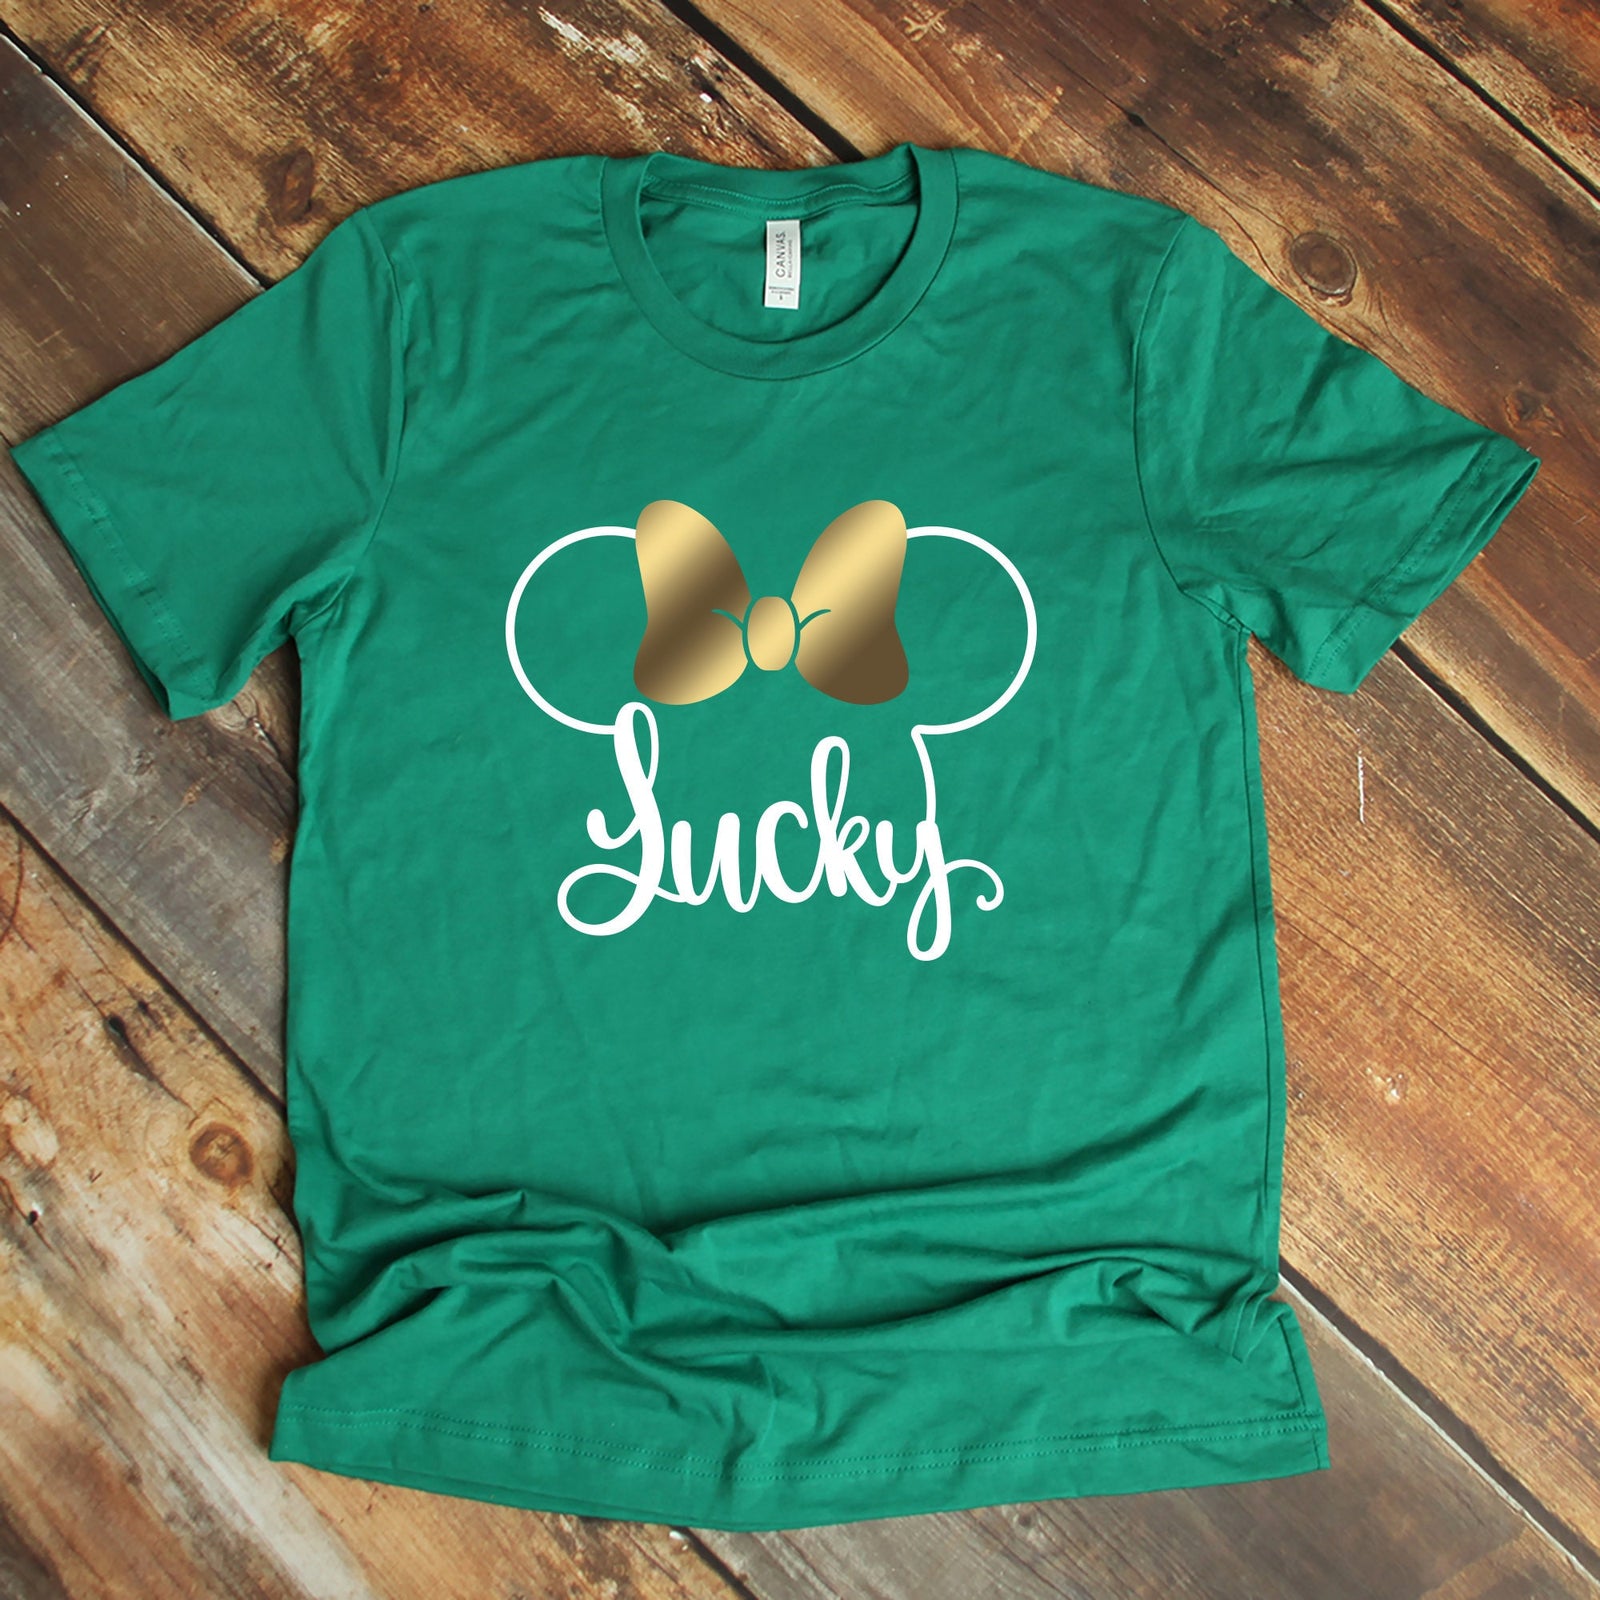 St. Patrick's Day Minnie Mouse T Shirt- Disney - Lucky Minnie Mouse Shirt- Mickey Ears Silhouette